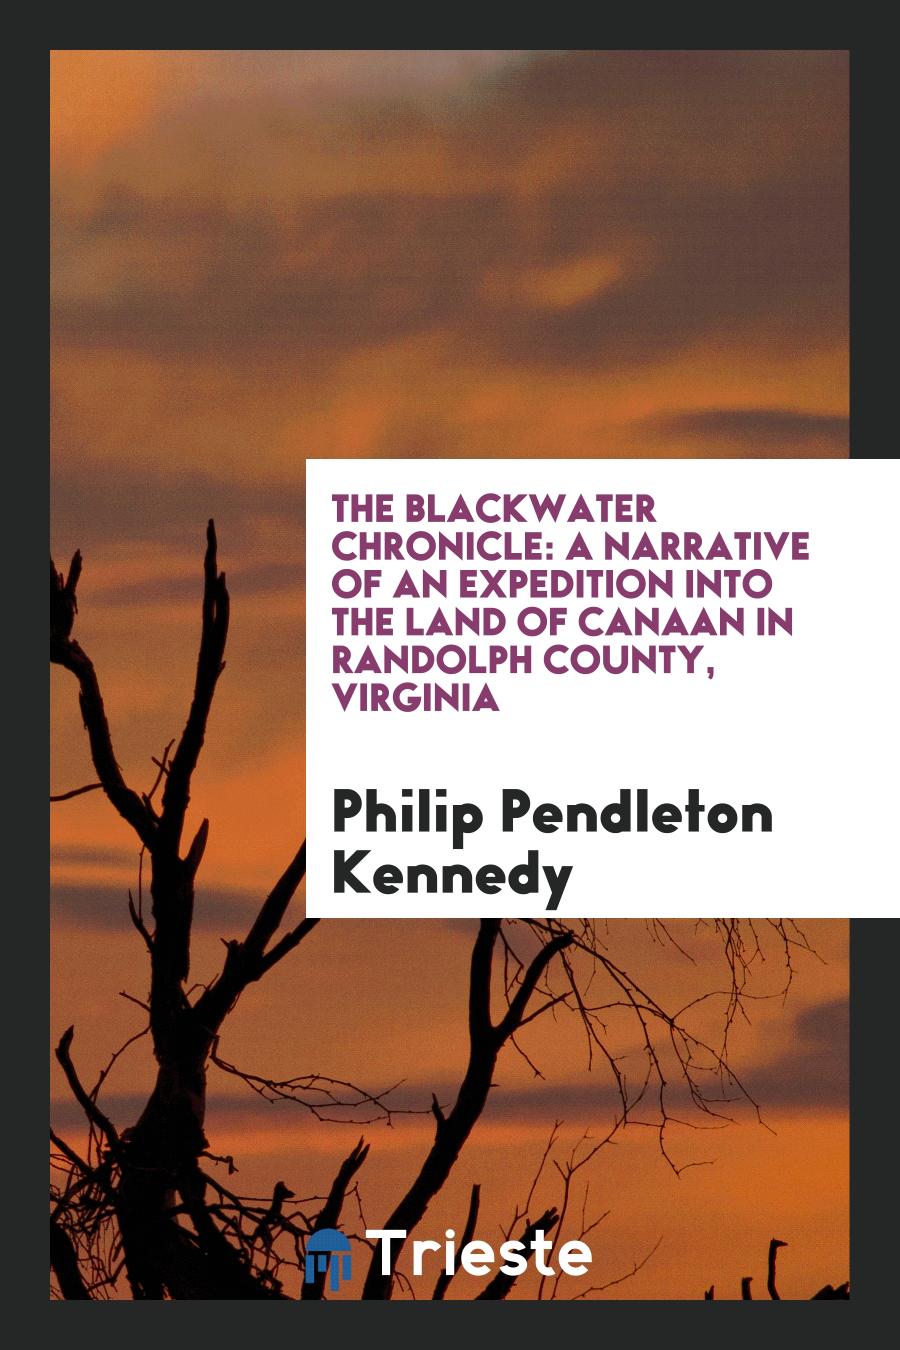 The Blackwater Chronicle: A Narrative of an Expedition into the Land of Canaan in Randolph County, Virginia